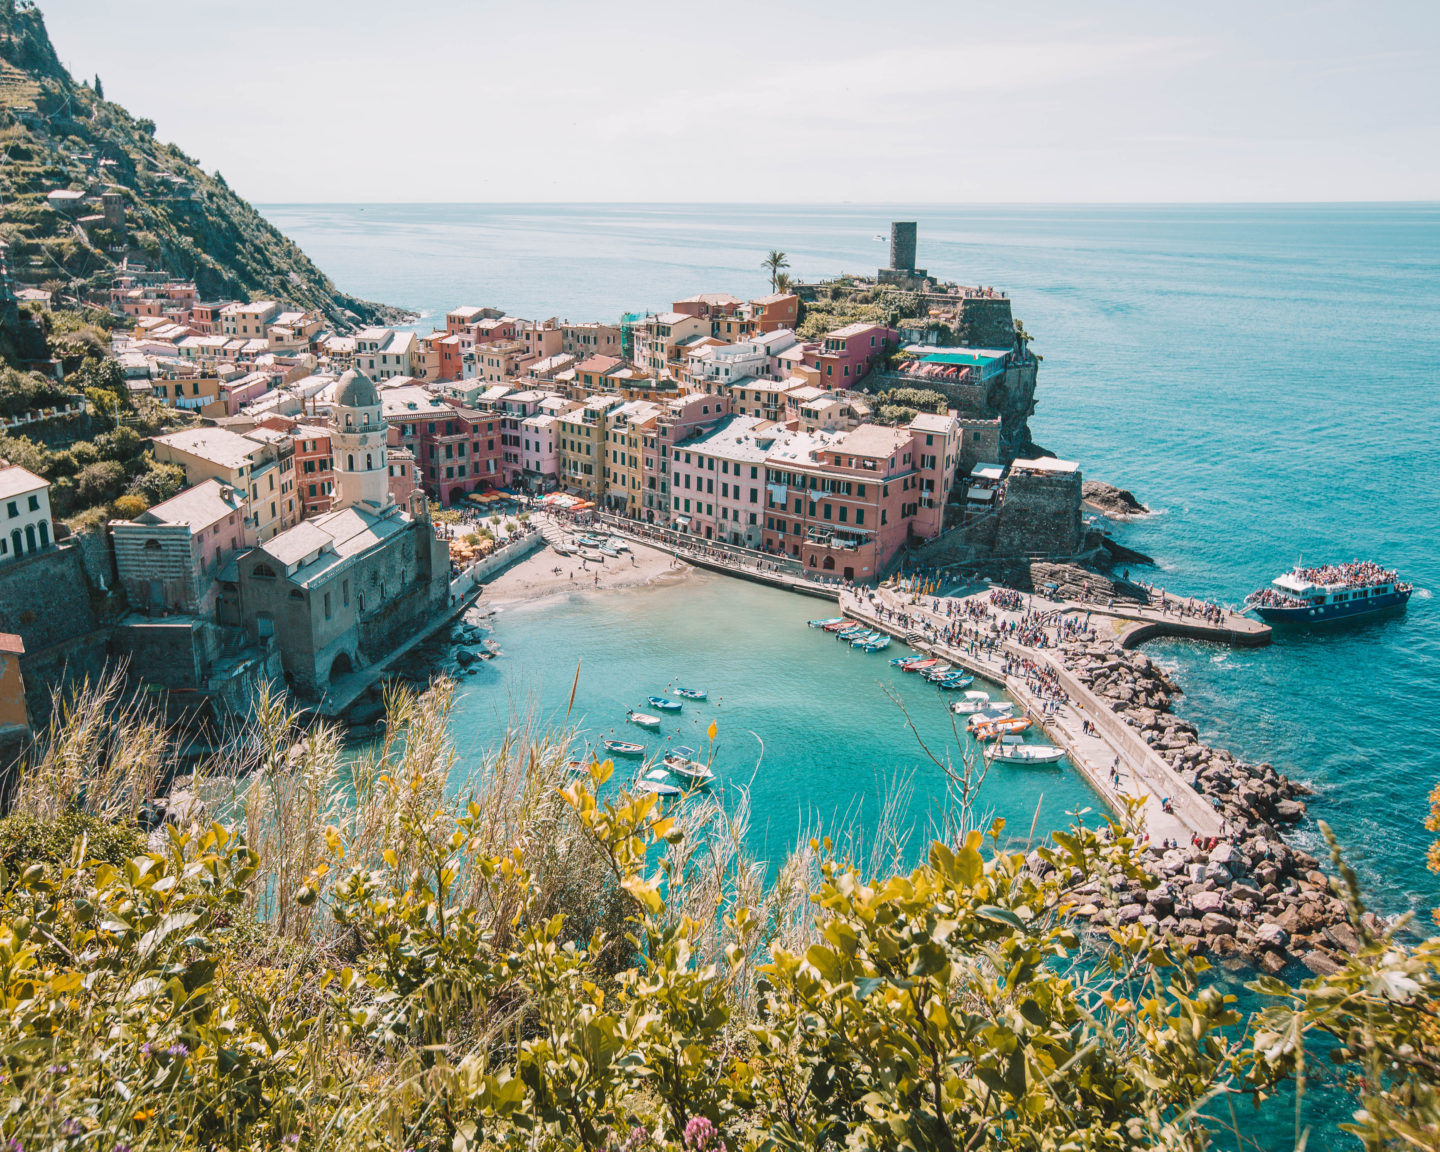 Dying to visit Cinque Terre? I've crafted your absolute perfect Cinque Terre day trip to visit all five villages! Check it out for yourself!